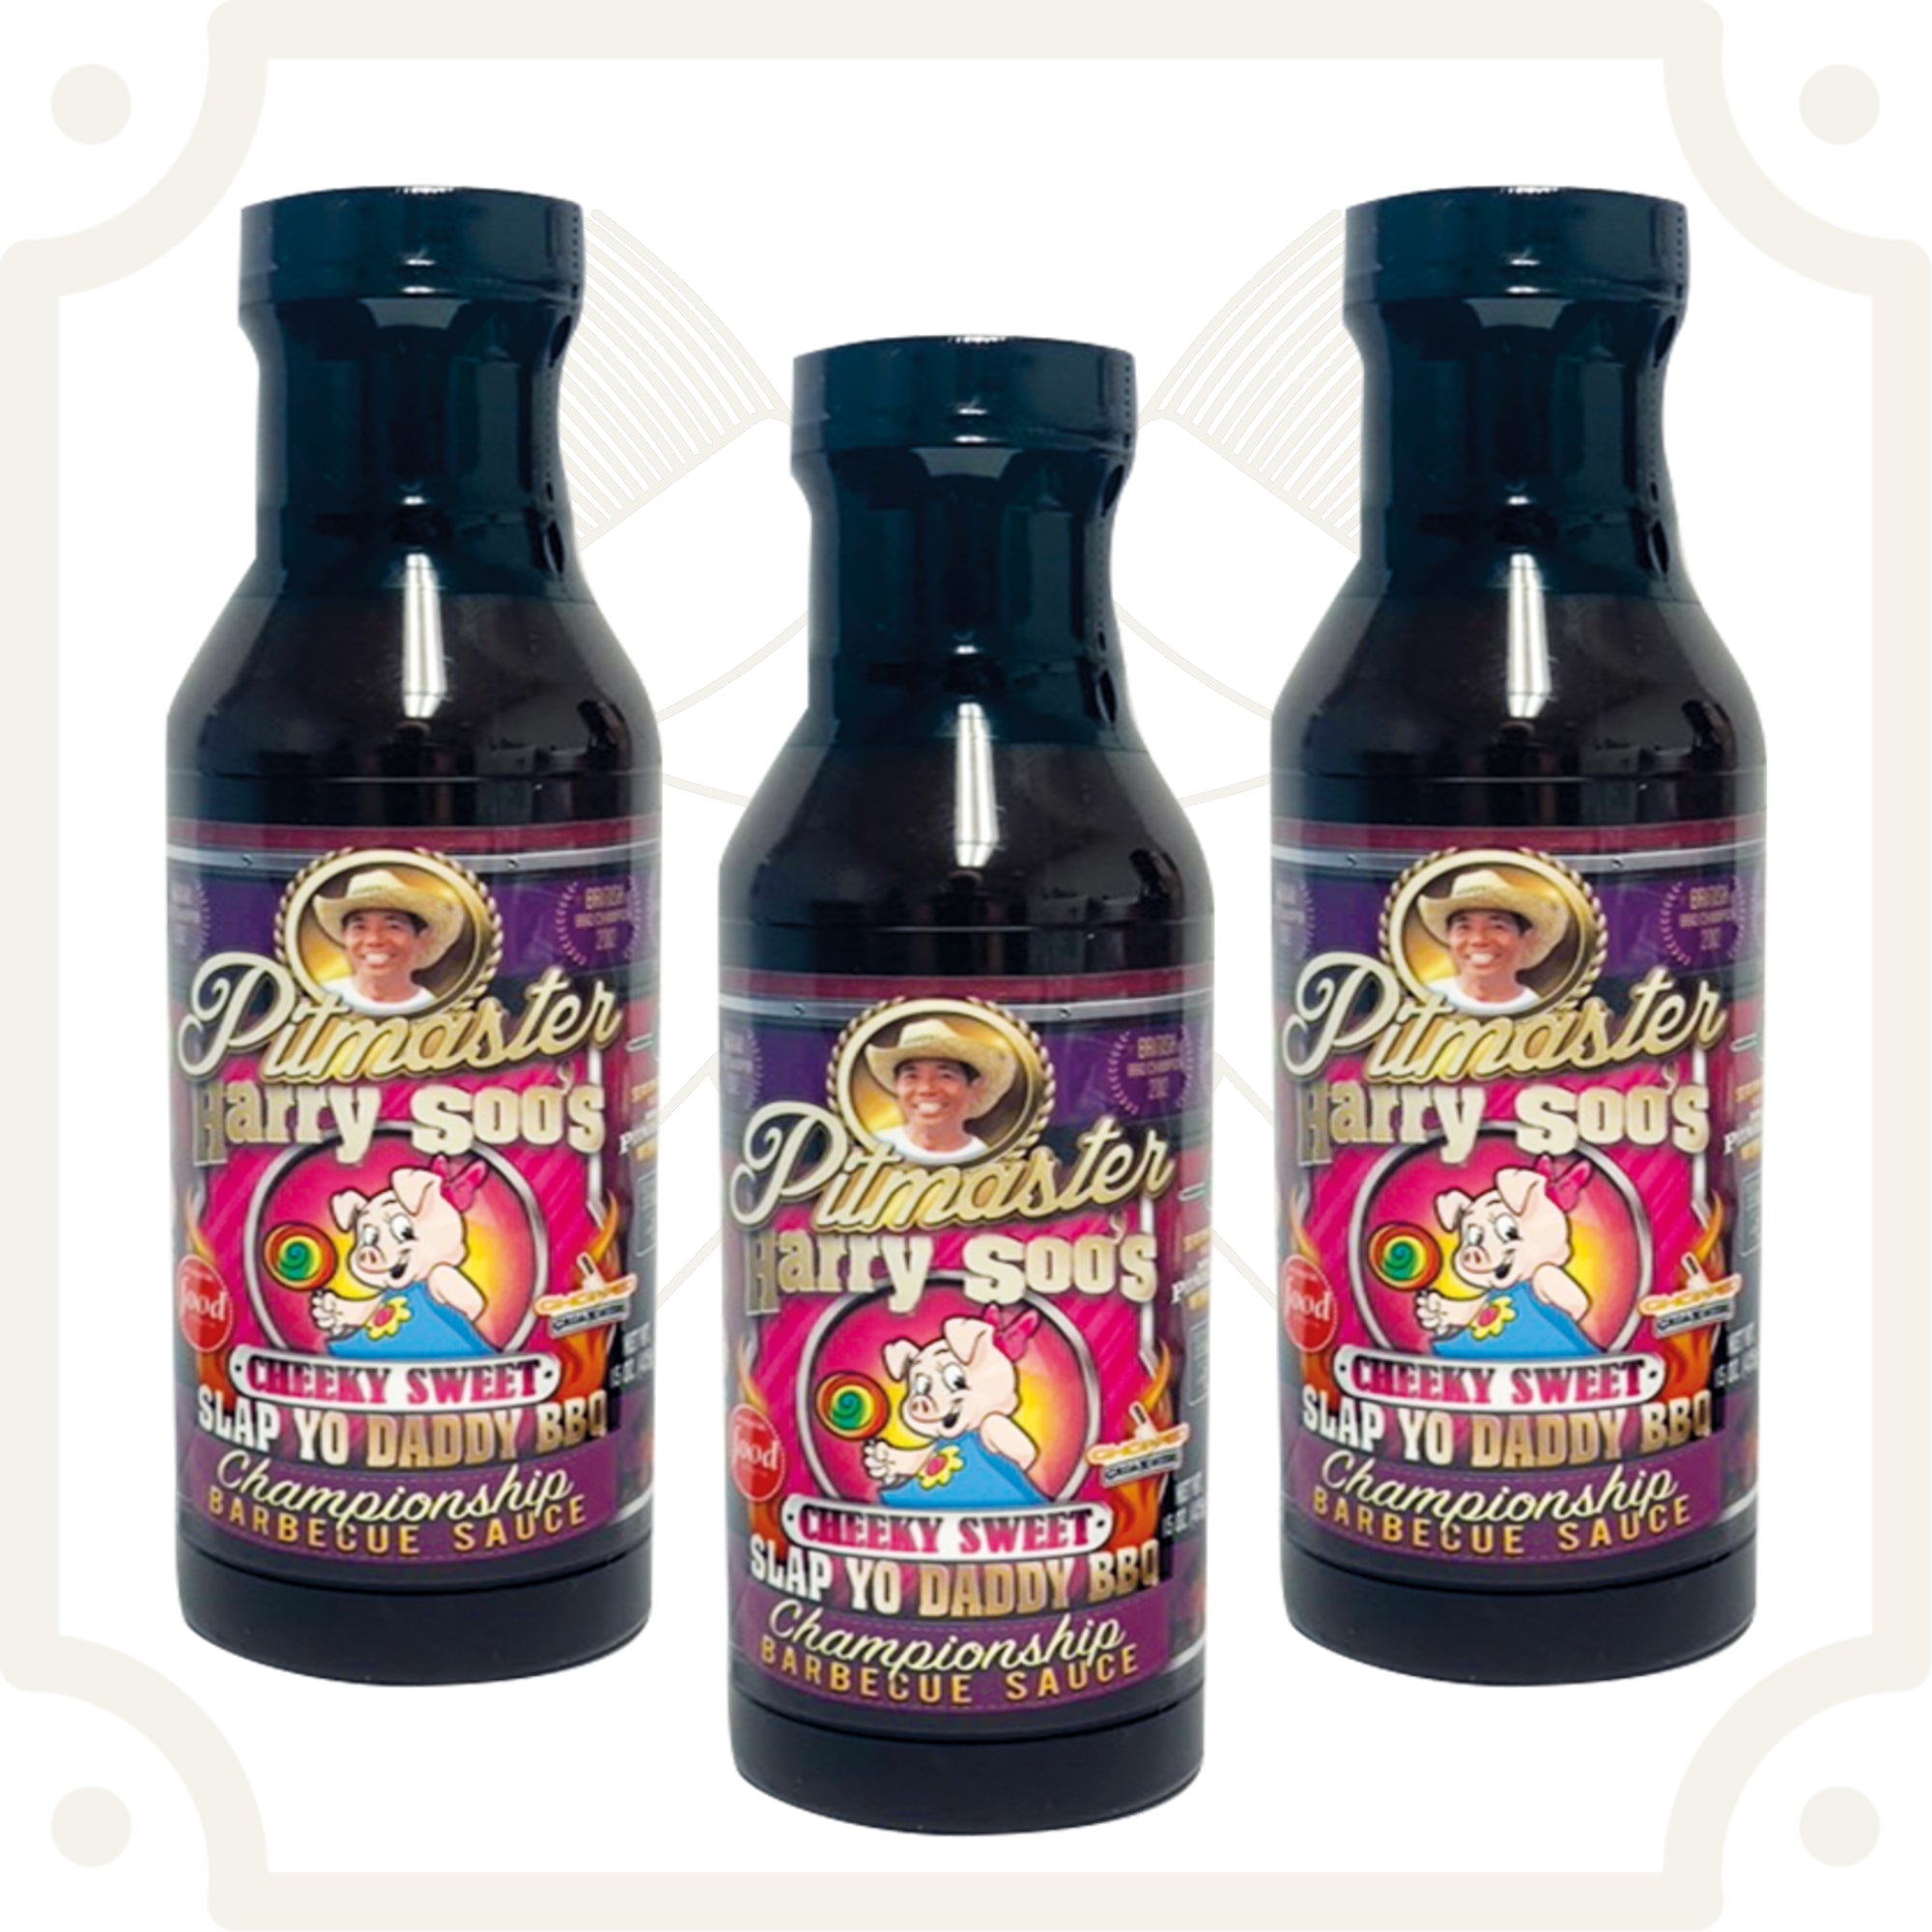 SYD BBQ Sauce - KC Cheeky Sweet (3 Pack)